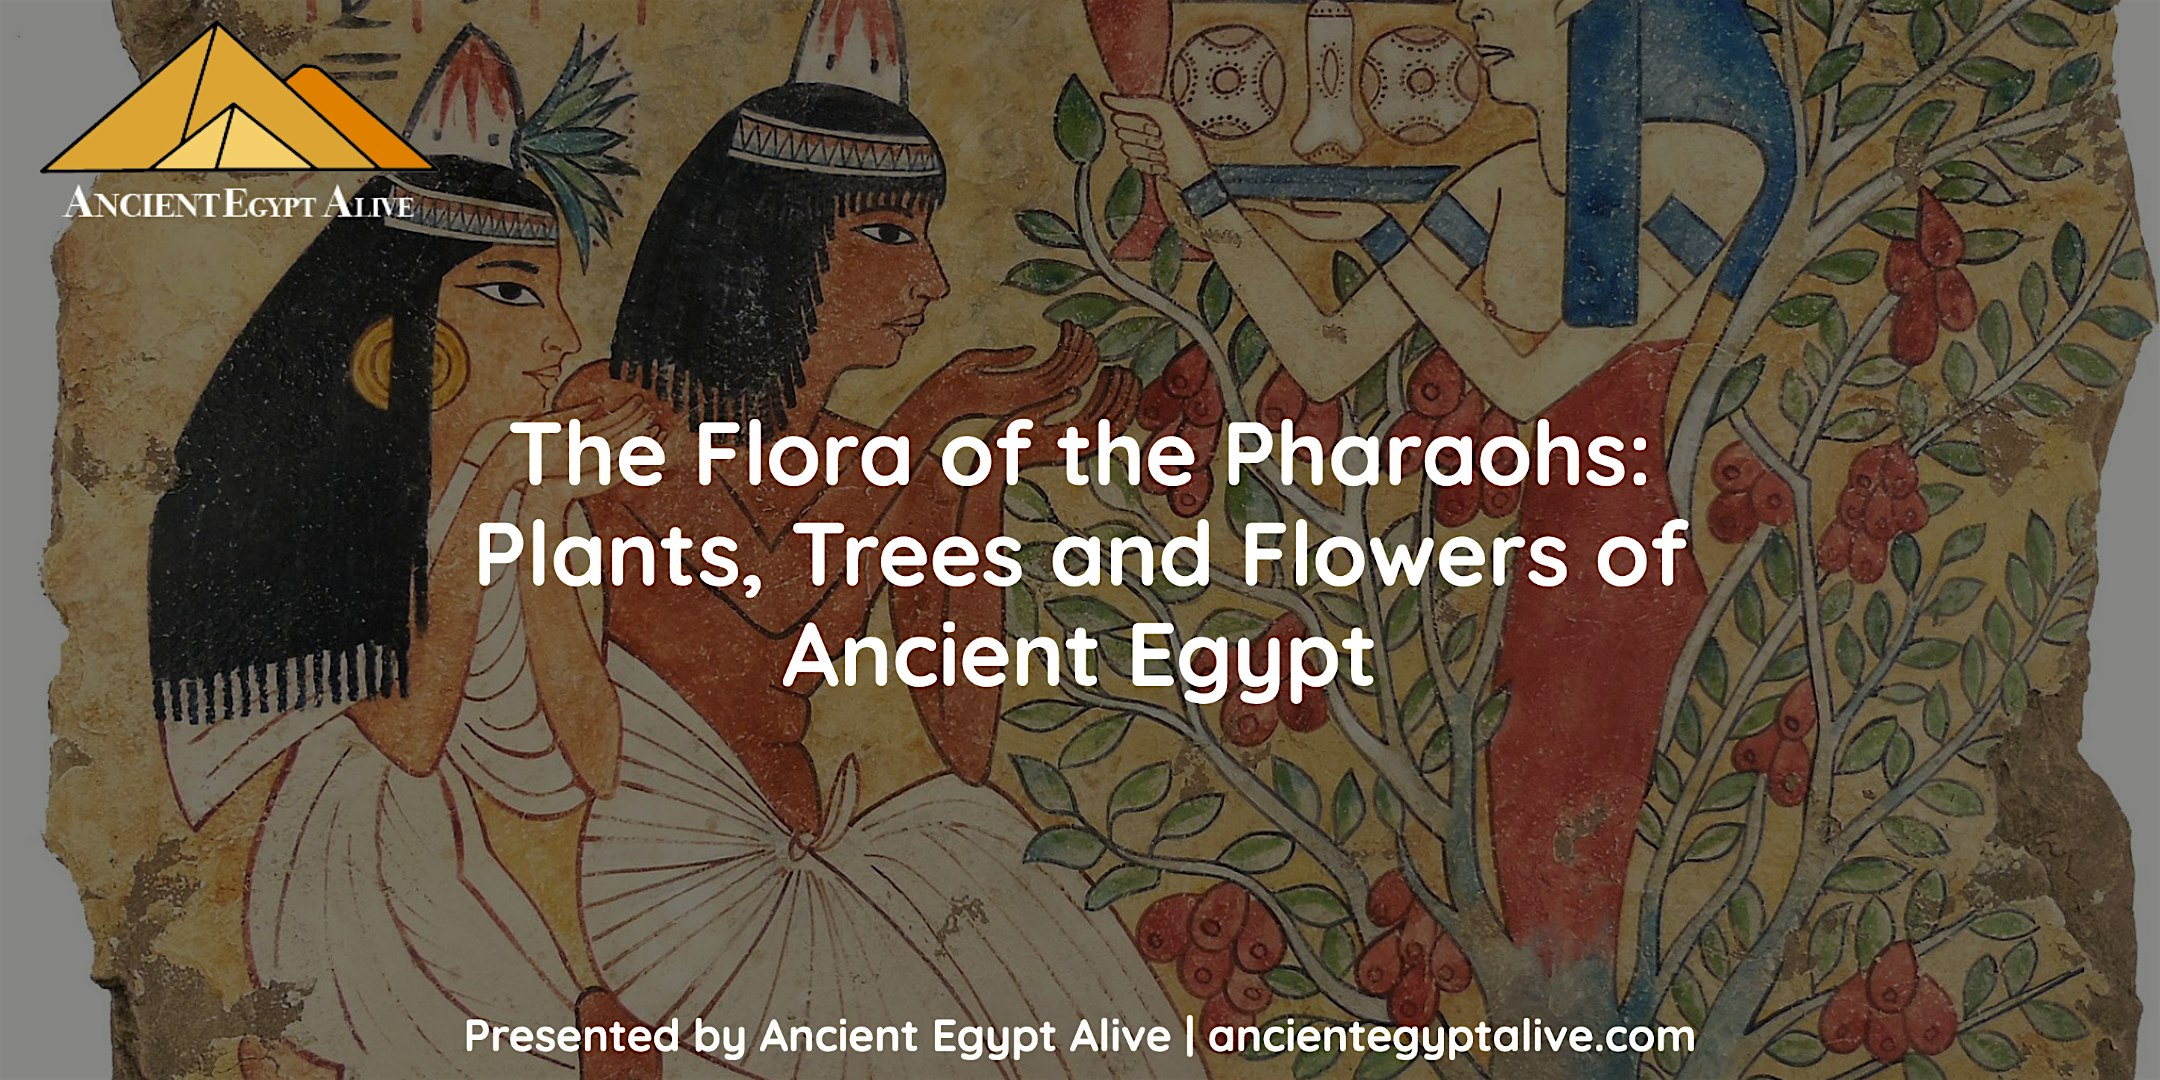 The Flora of the Pharaohs: Plants, Trees and Flowers of Ancient Egypt